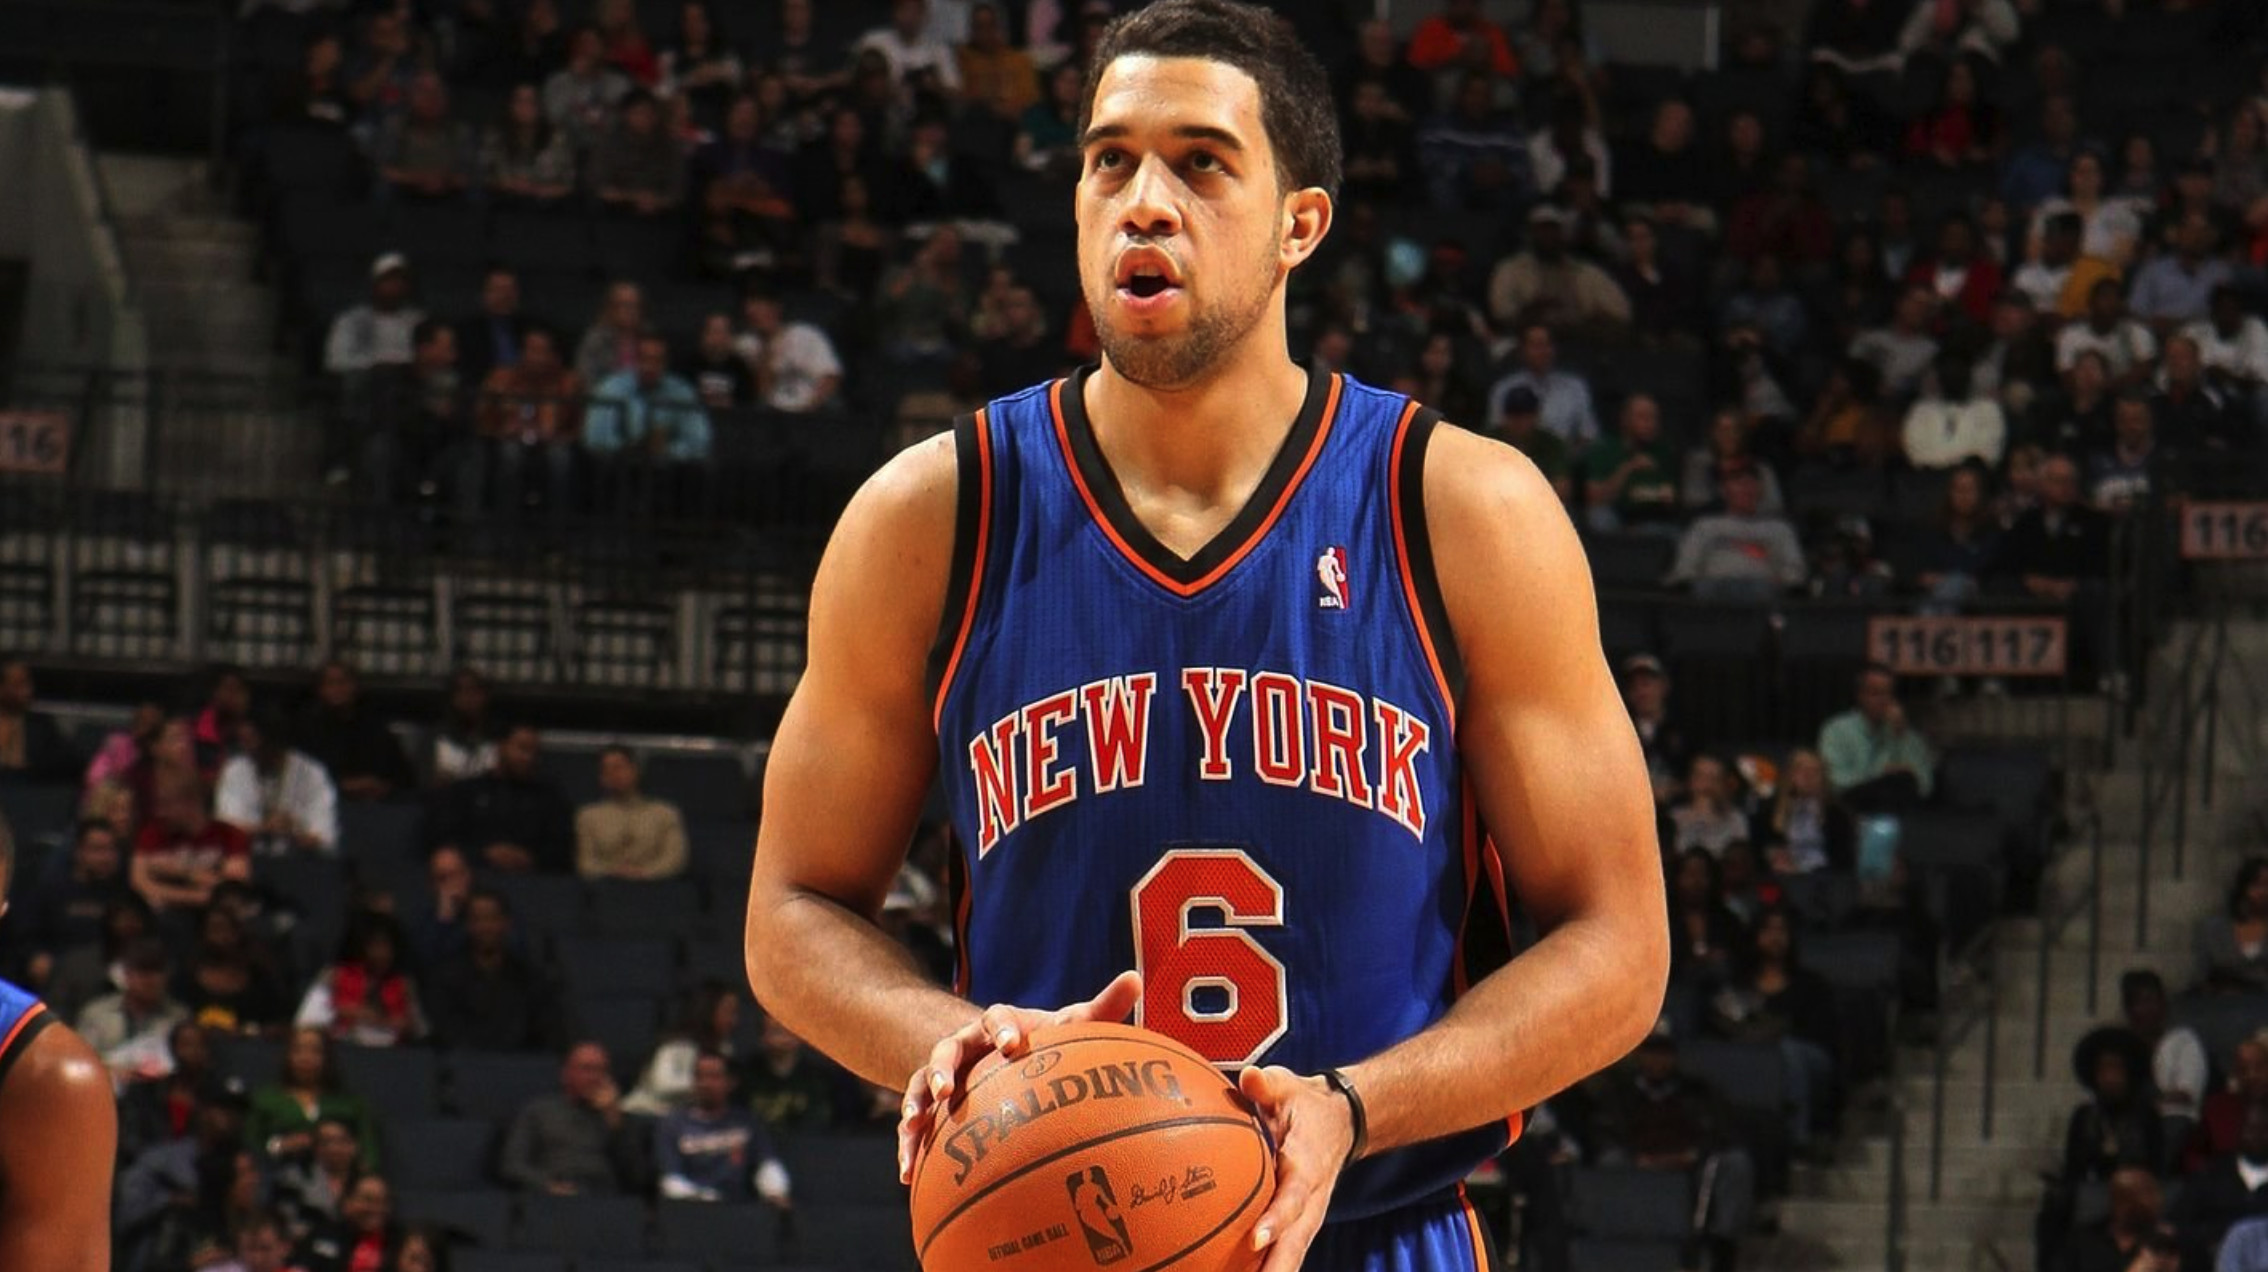 Report: Hawks hire Landry Fields as assistant general manager